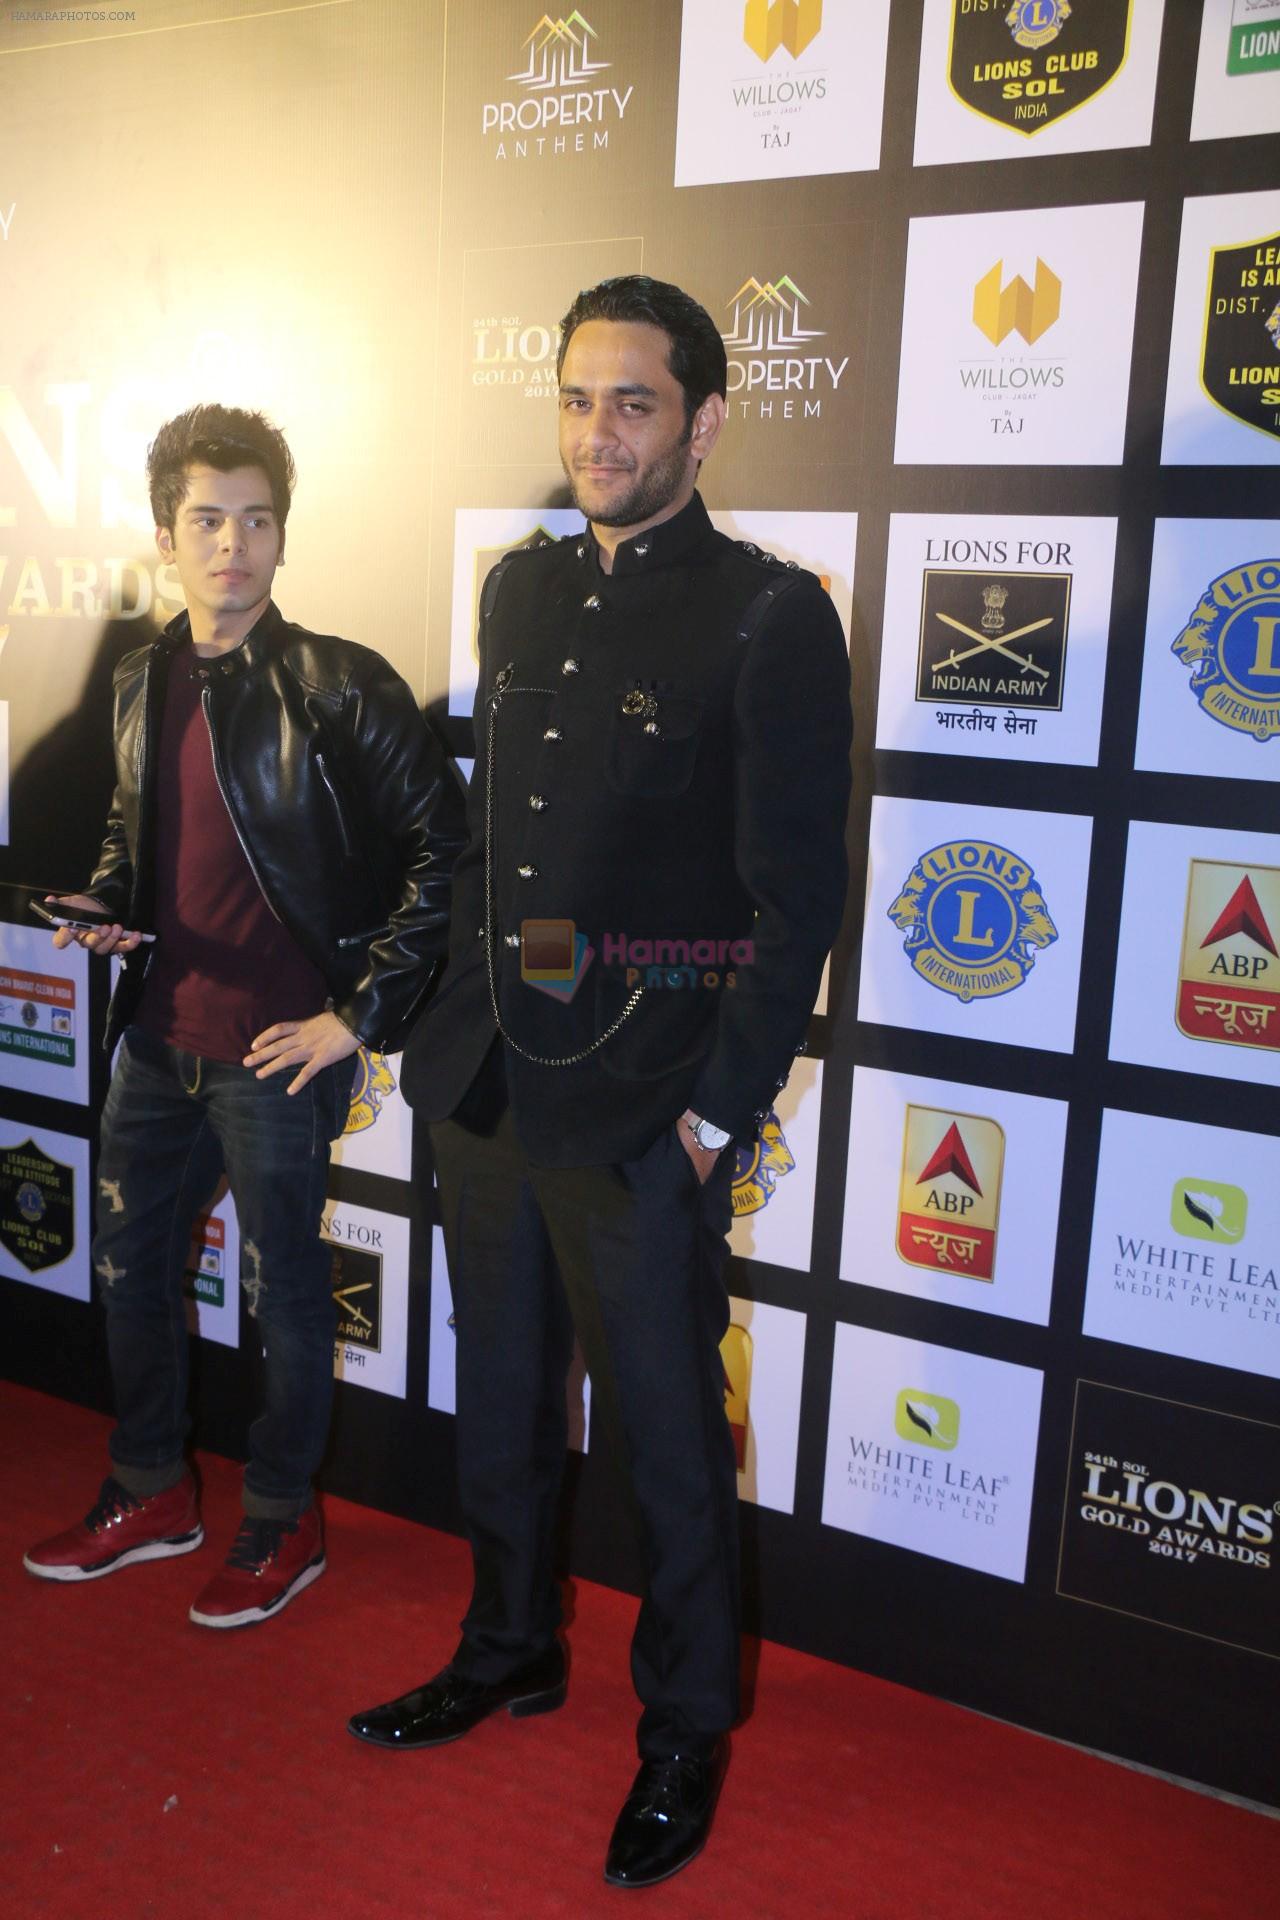 At 24th SOL Lions Gold Awards on 24th Jan 2018